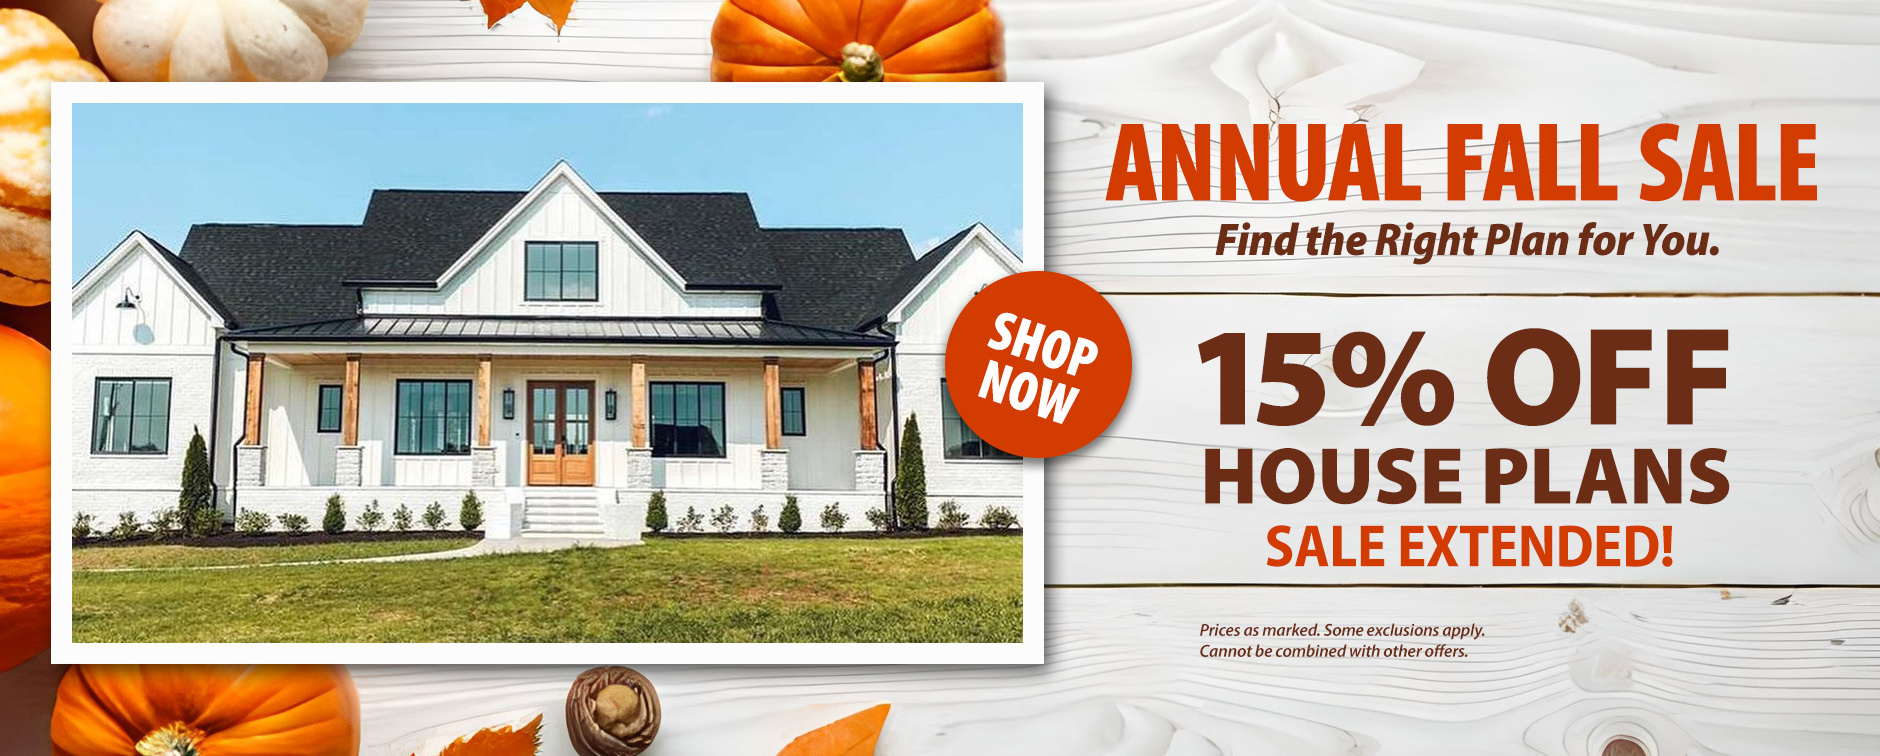 House Plans On Sale - 15% Off Thousands of Designs - Event Extended